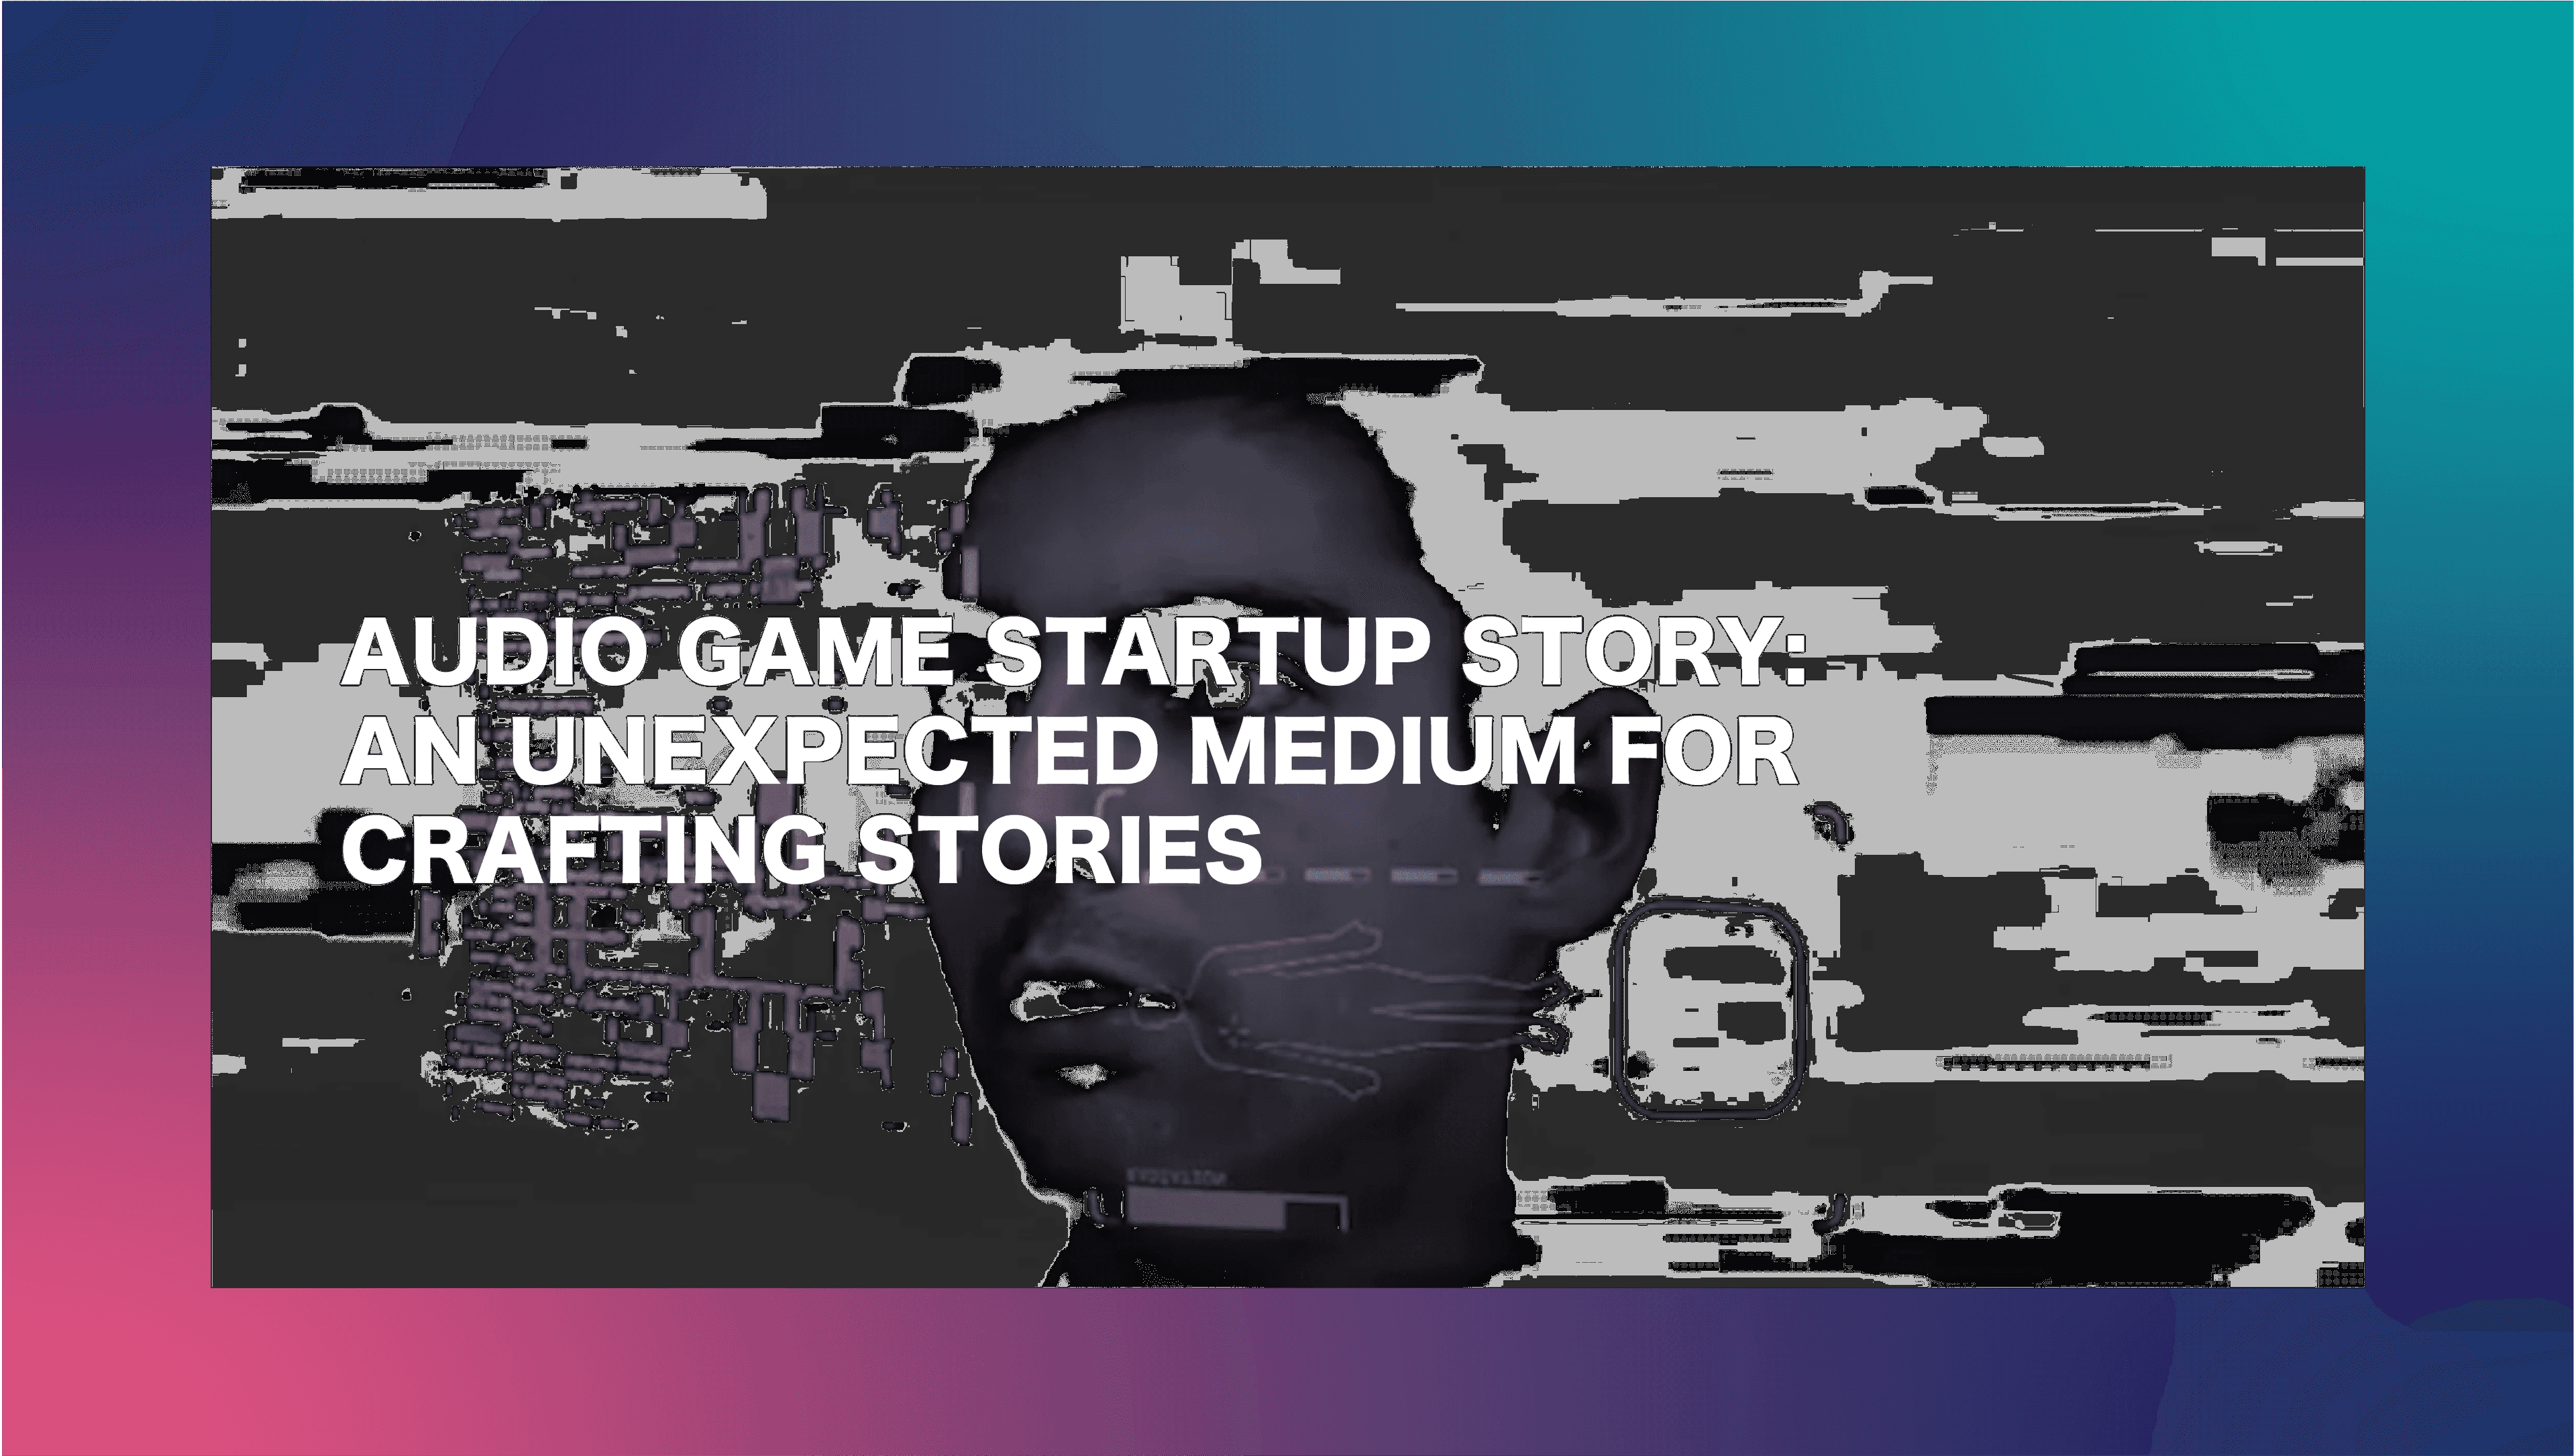 Audio Game Startup Story Unexpected Medium crafting stories